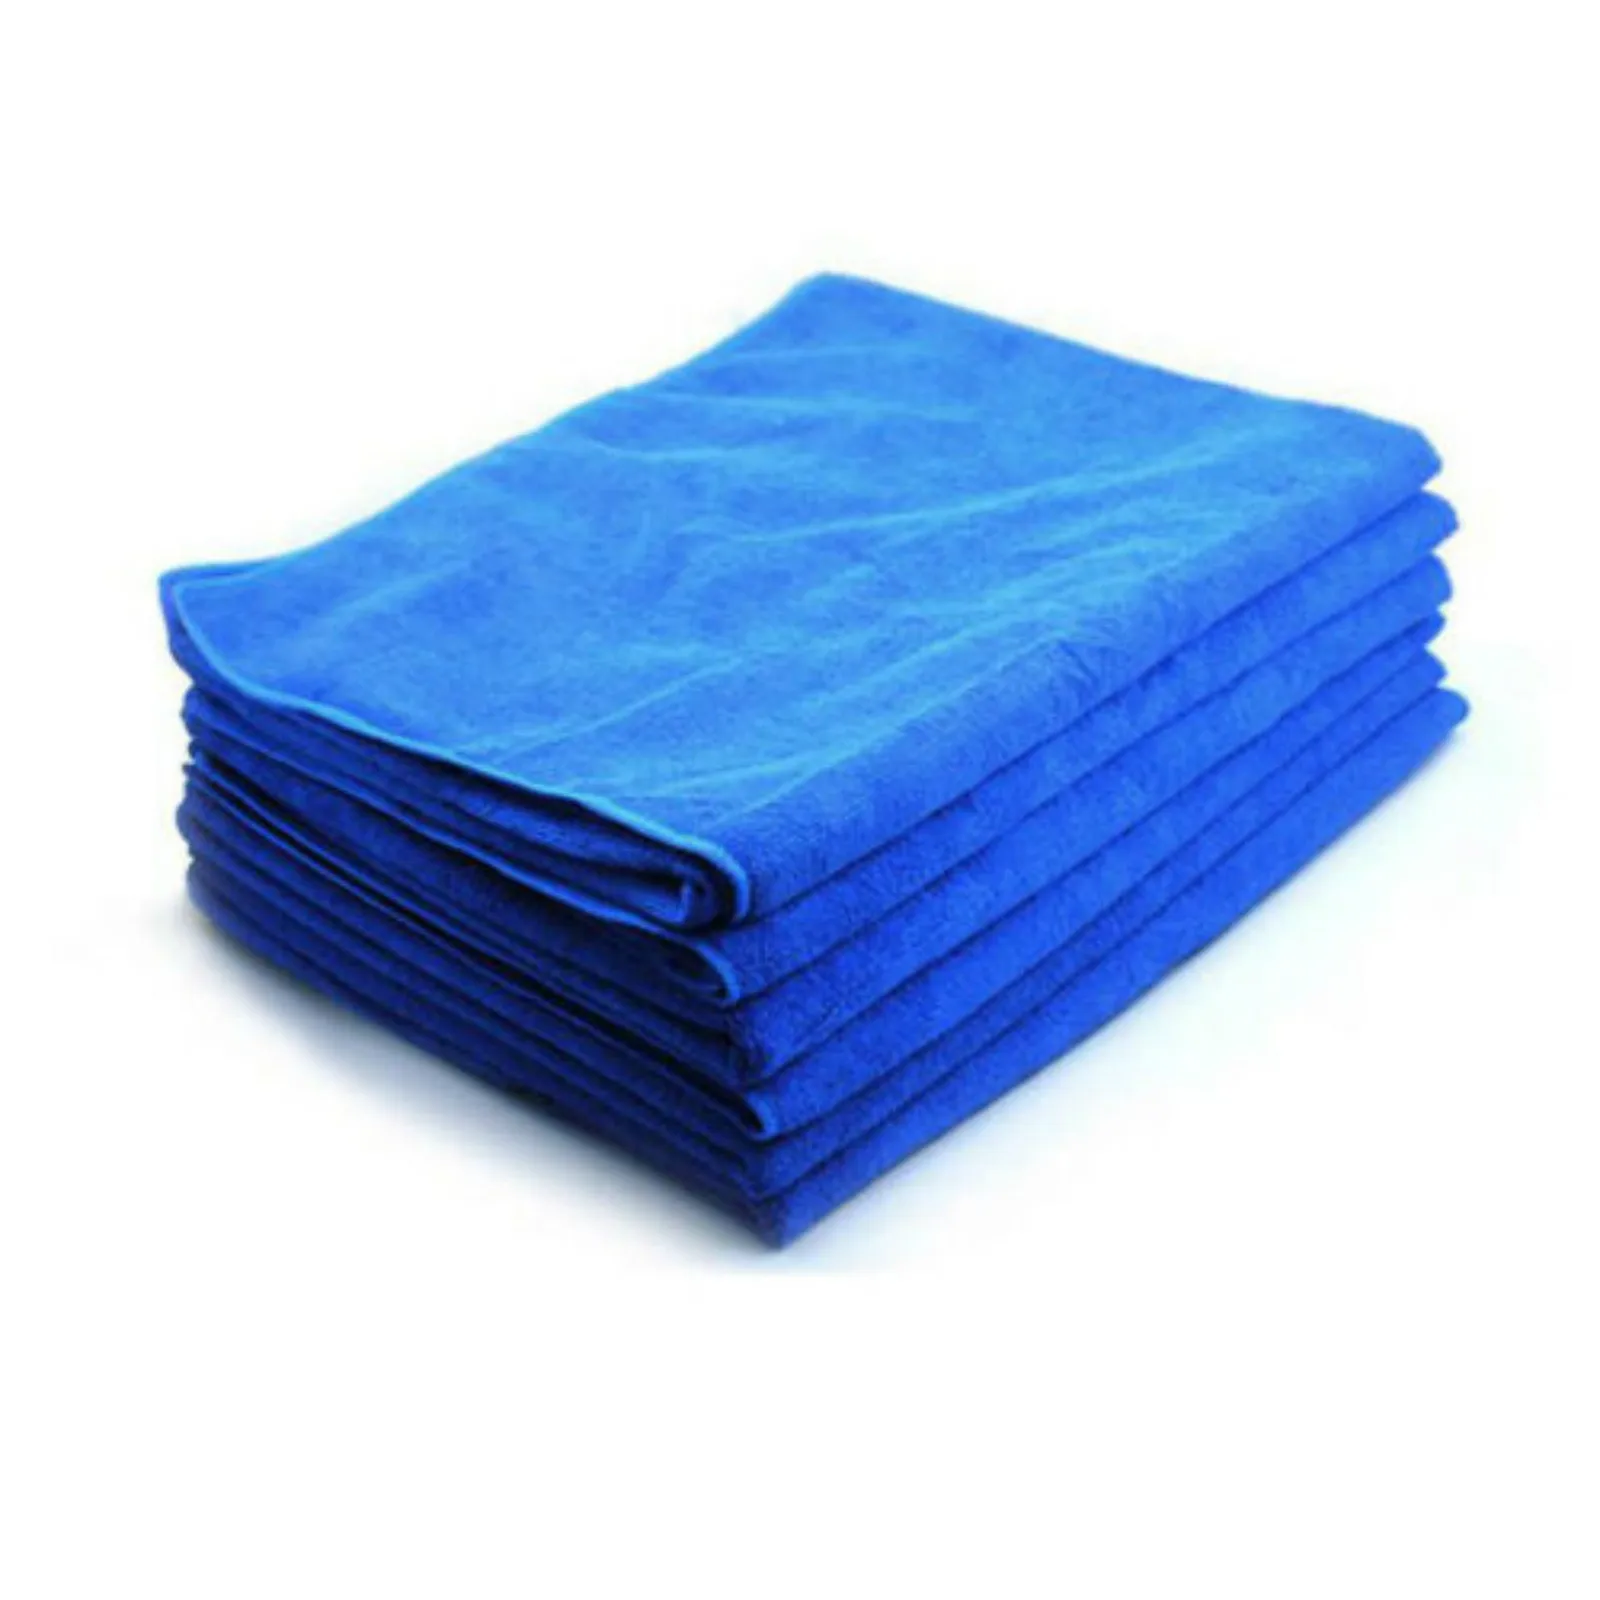 160x60cm Car Wash Microfiber Towel Cleaning Drying Car Polishing Cloth Soft Edgeless Car Detailing Waxing Towel cleaning leather seats